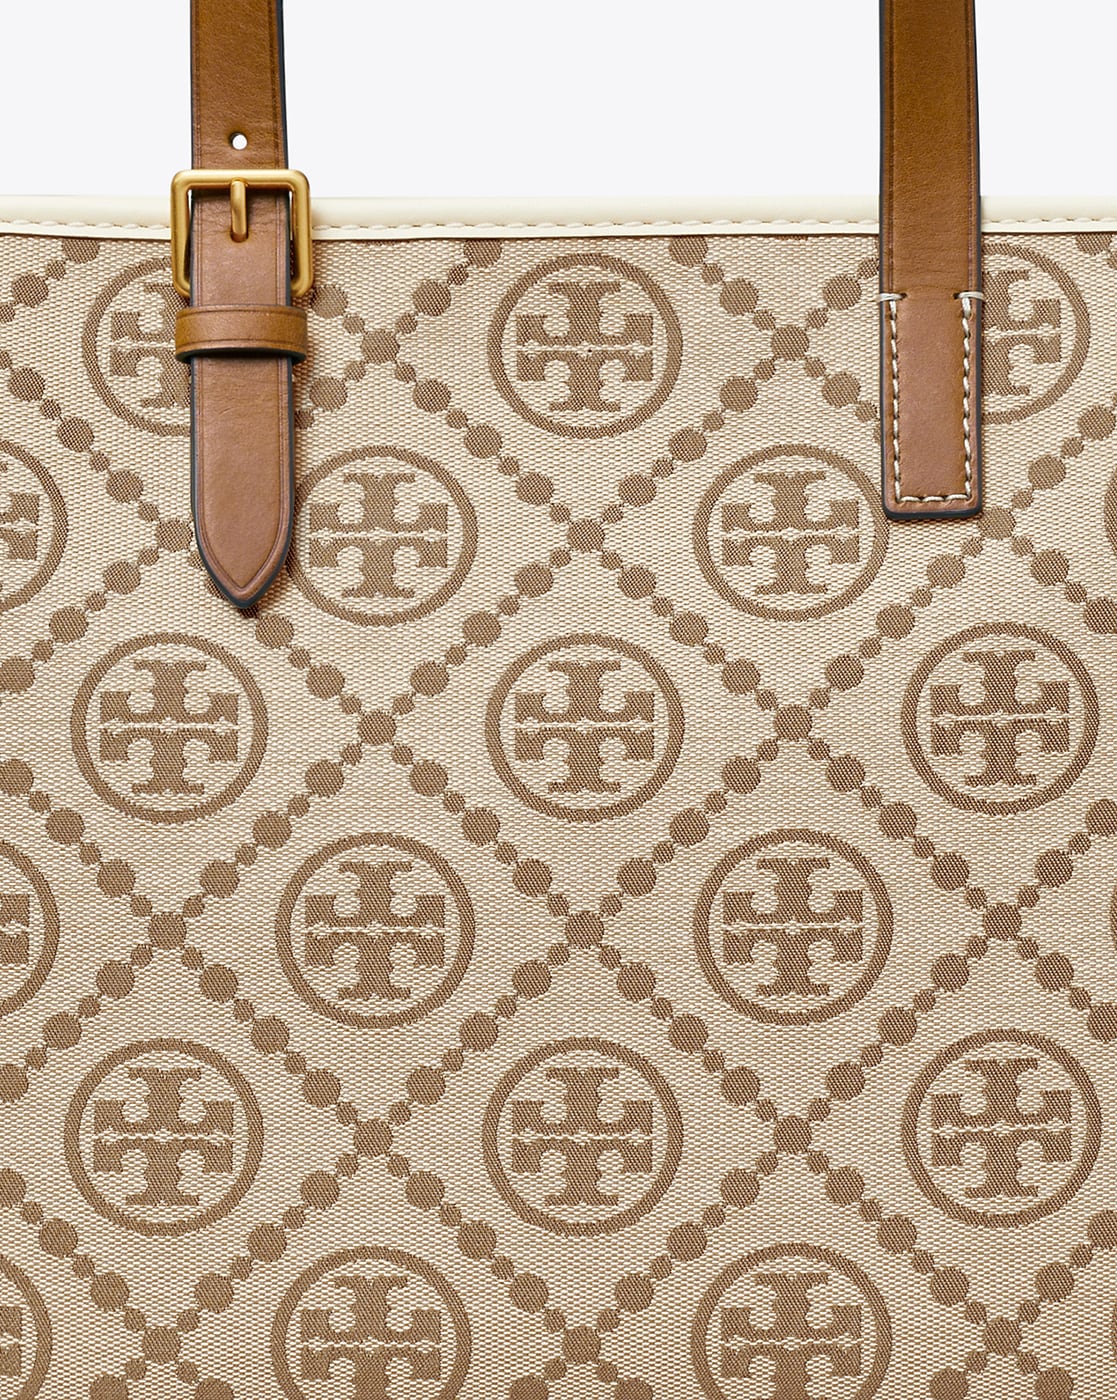 Tory Burch Tory Burch Canvas Tote Bag - Stylemyle